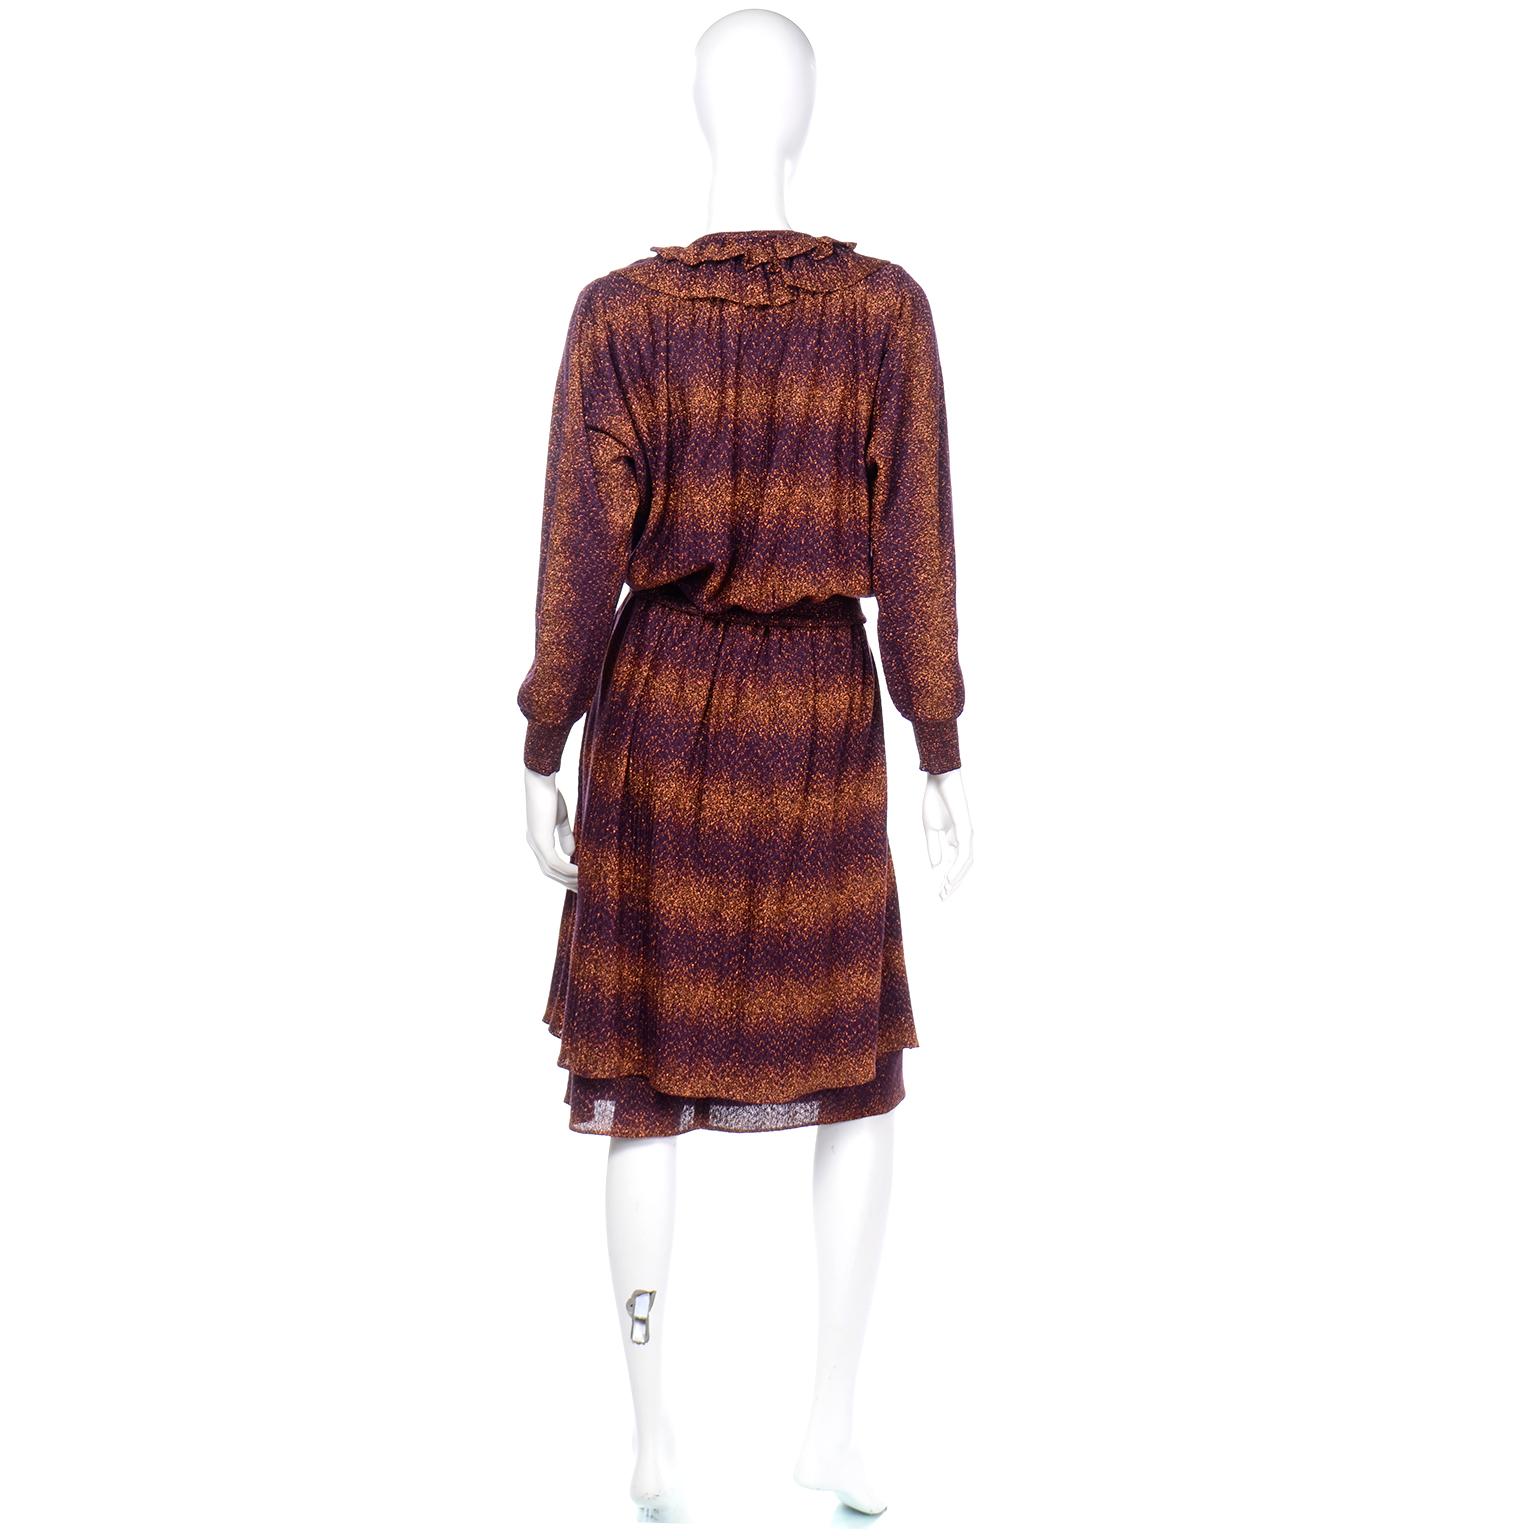 Vintage Missoni 2pc Dress Purple & Copper Metallic Ruffled Top & Tiered Skirt In Excellent Condition For Sale In Portland, OR